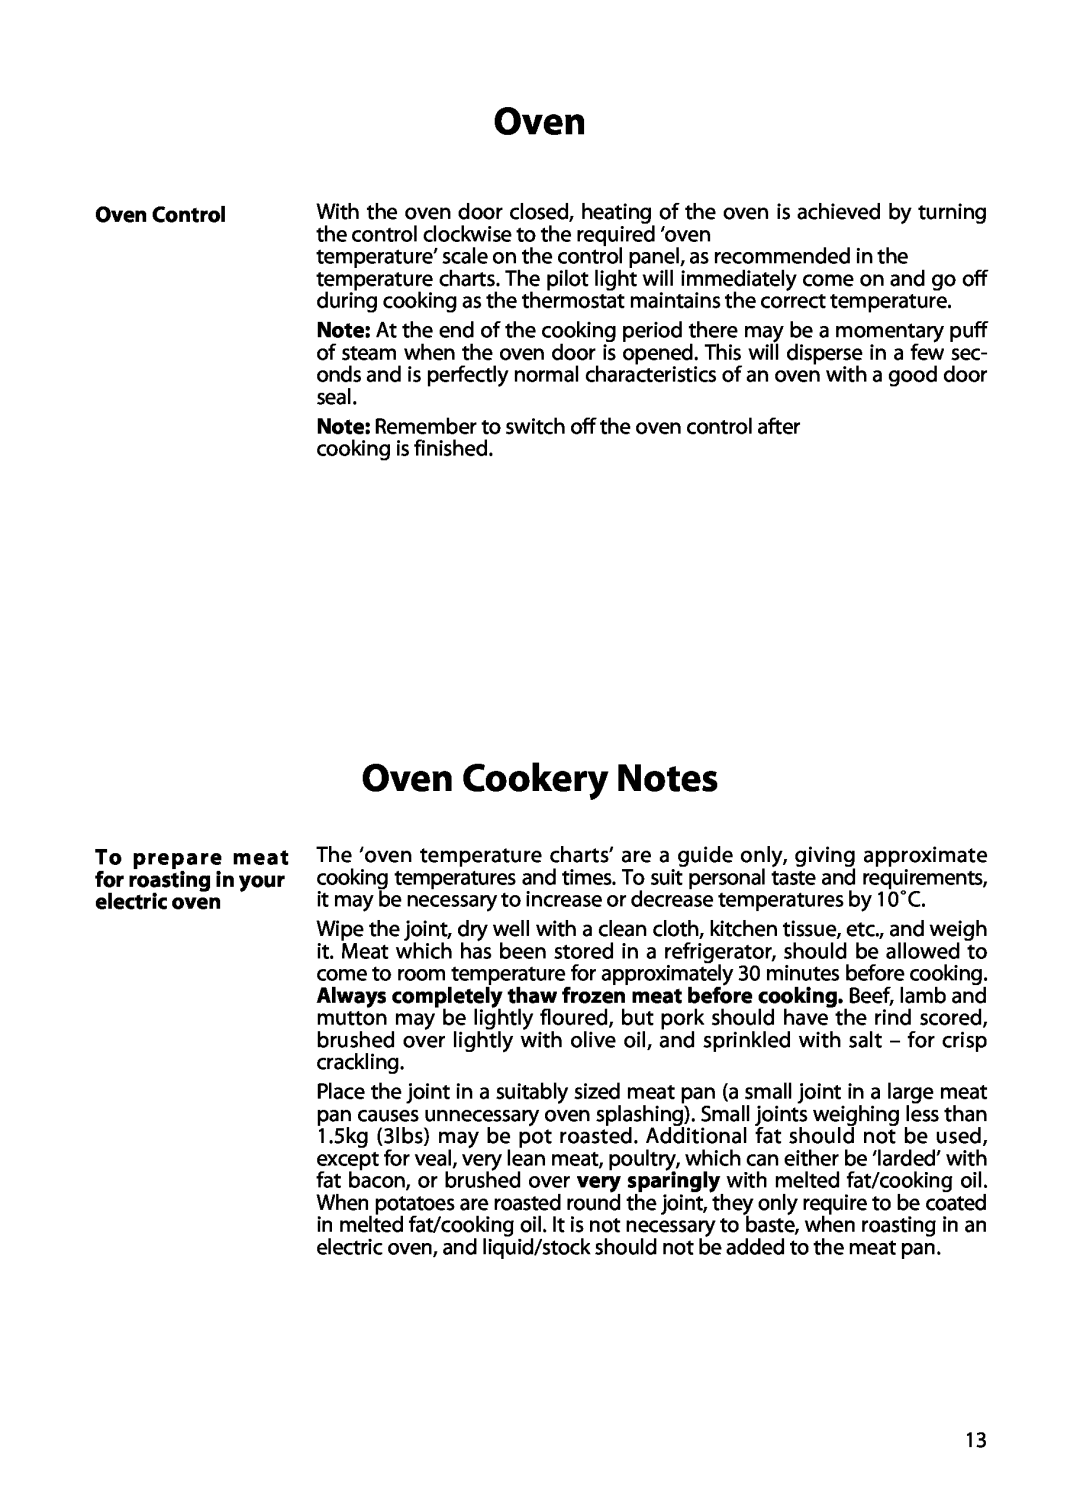 Hotpoint H150E manual Oven Cookery Notes, Oven Control, To prepare meat for roasting in your electric oven 